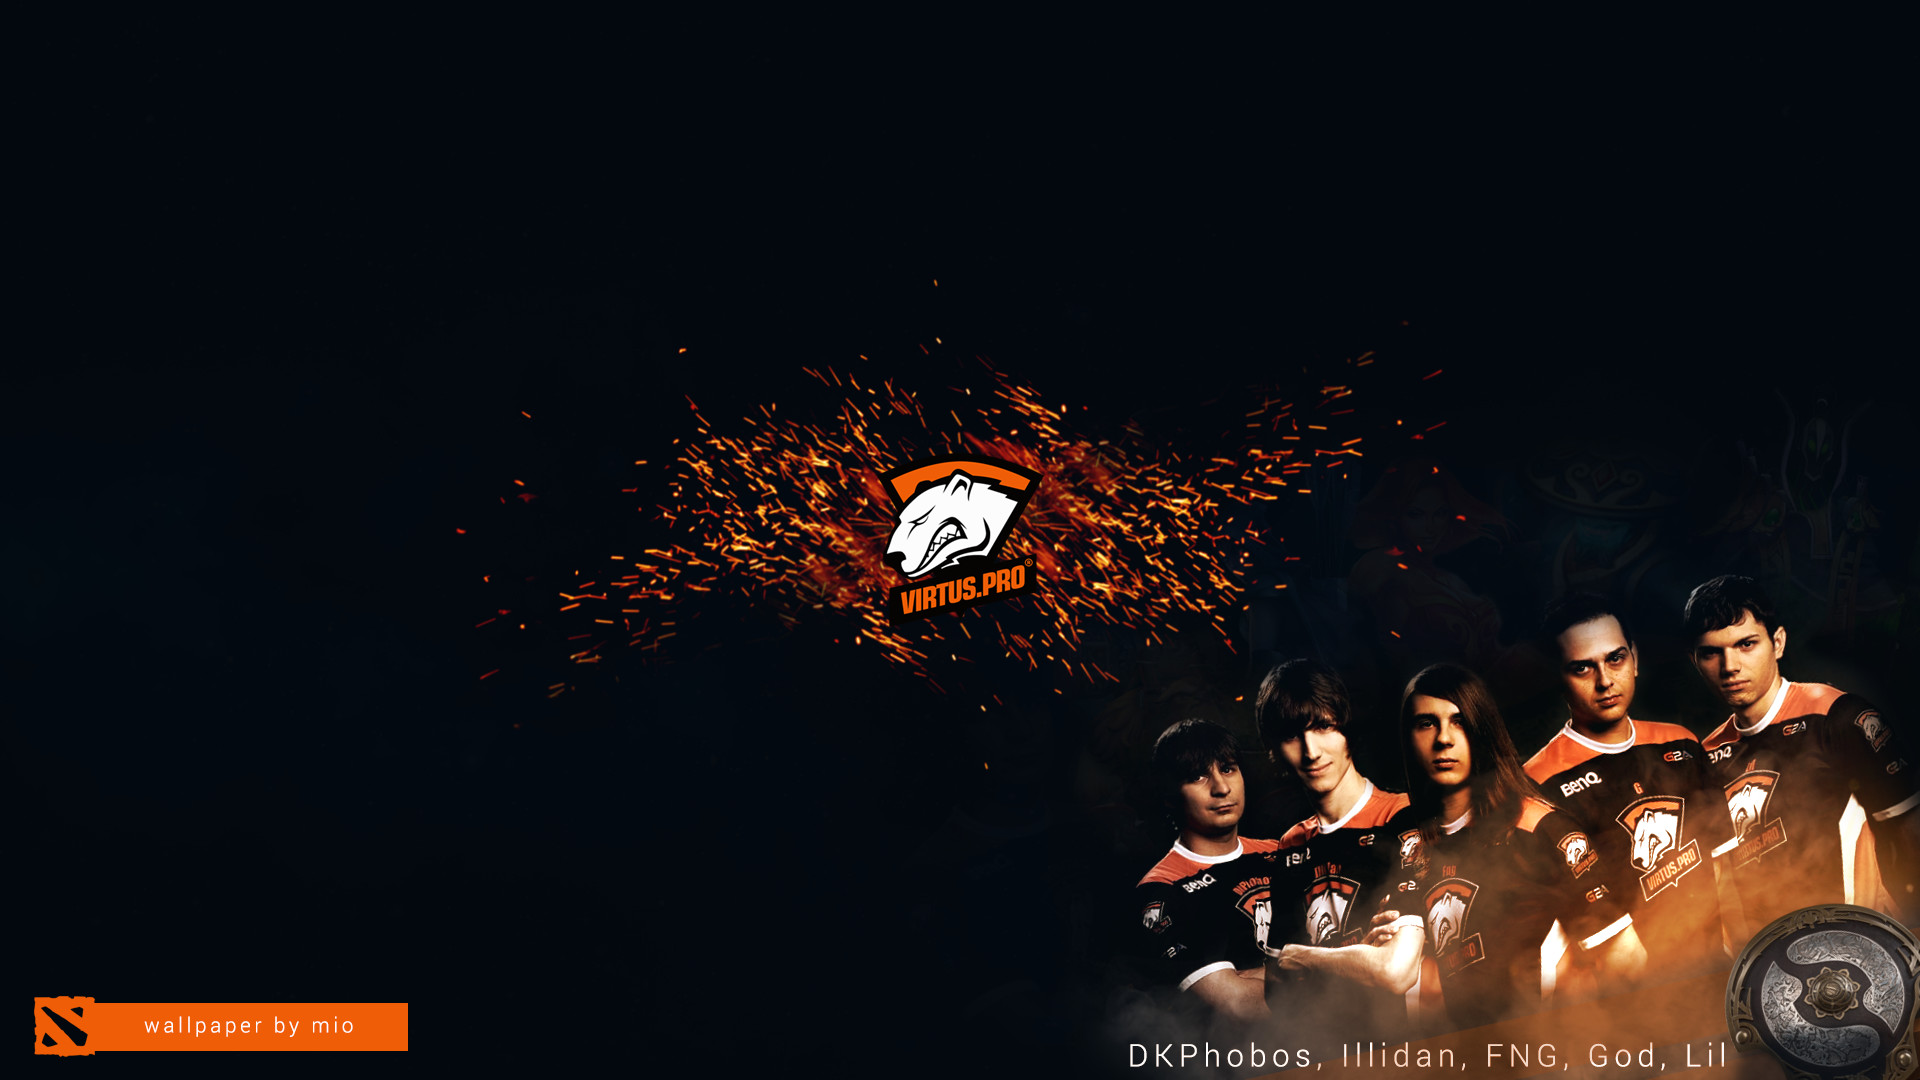 1920x1080 My Friend Mio just made this wallpaper as a tribute to Virtus.Pro for  winning Team Secret